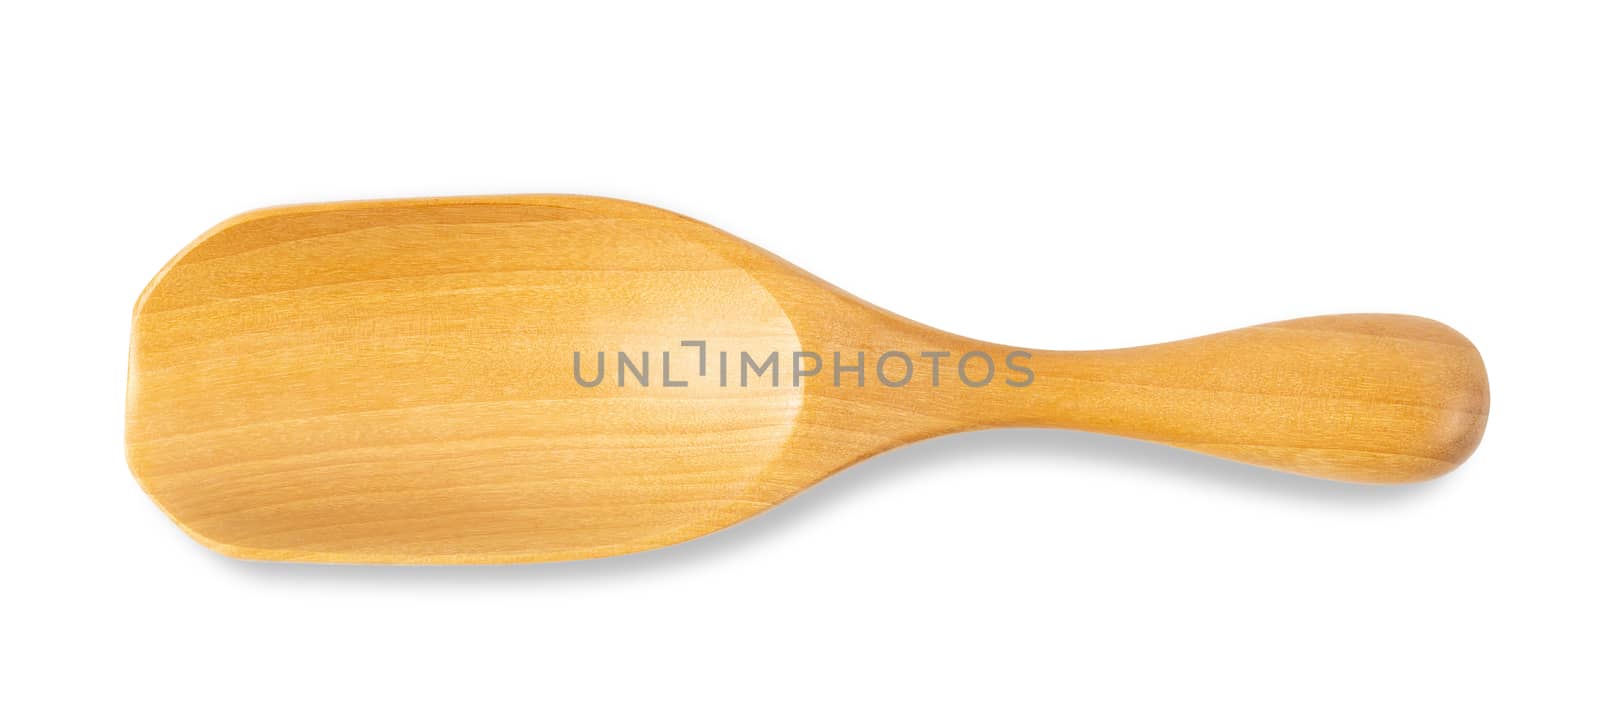 Wooden spoon isolated on a white background.